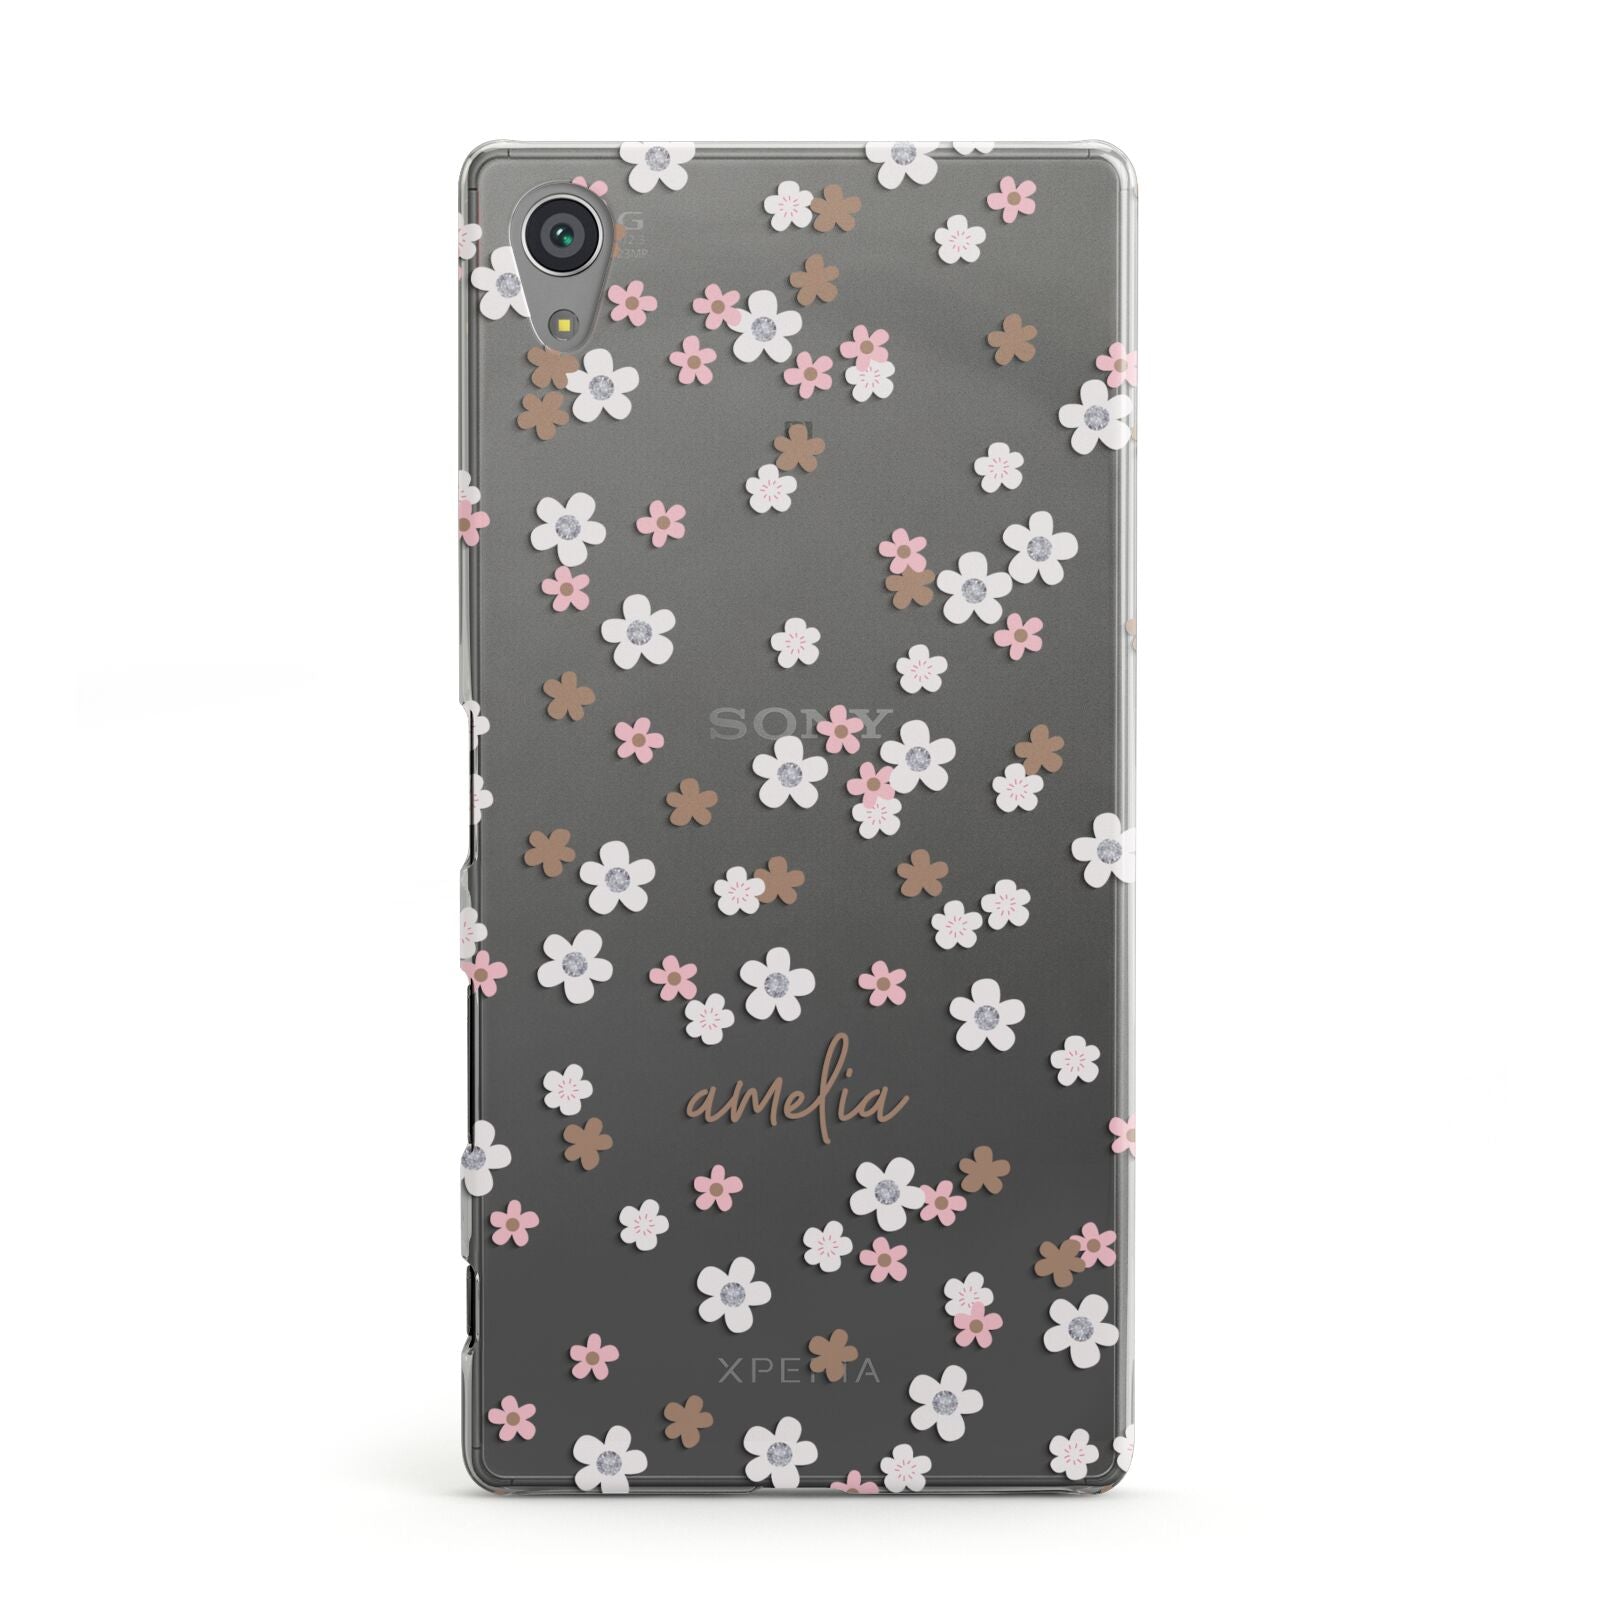 Cherry Blossom with Name Sony Xperia Case